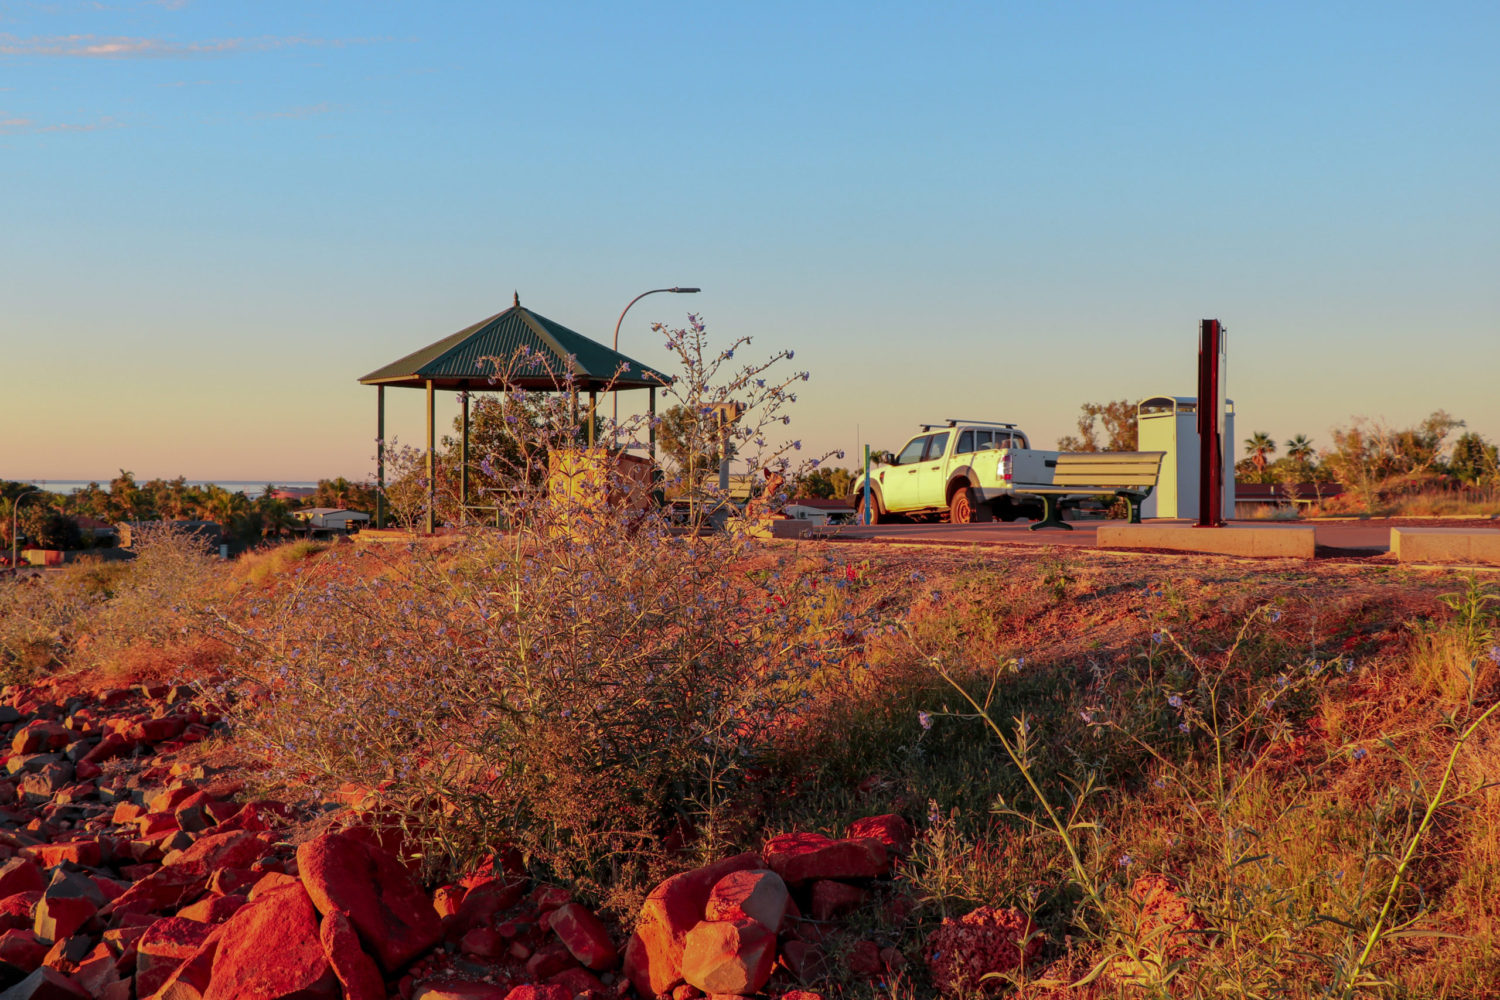 Red Dog Lookout in Dampier